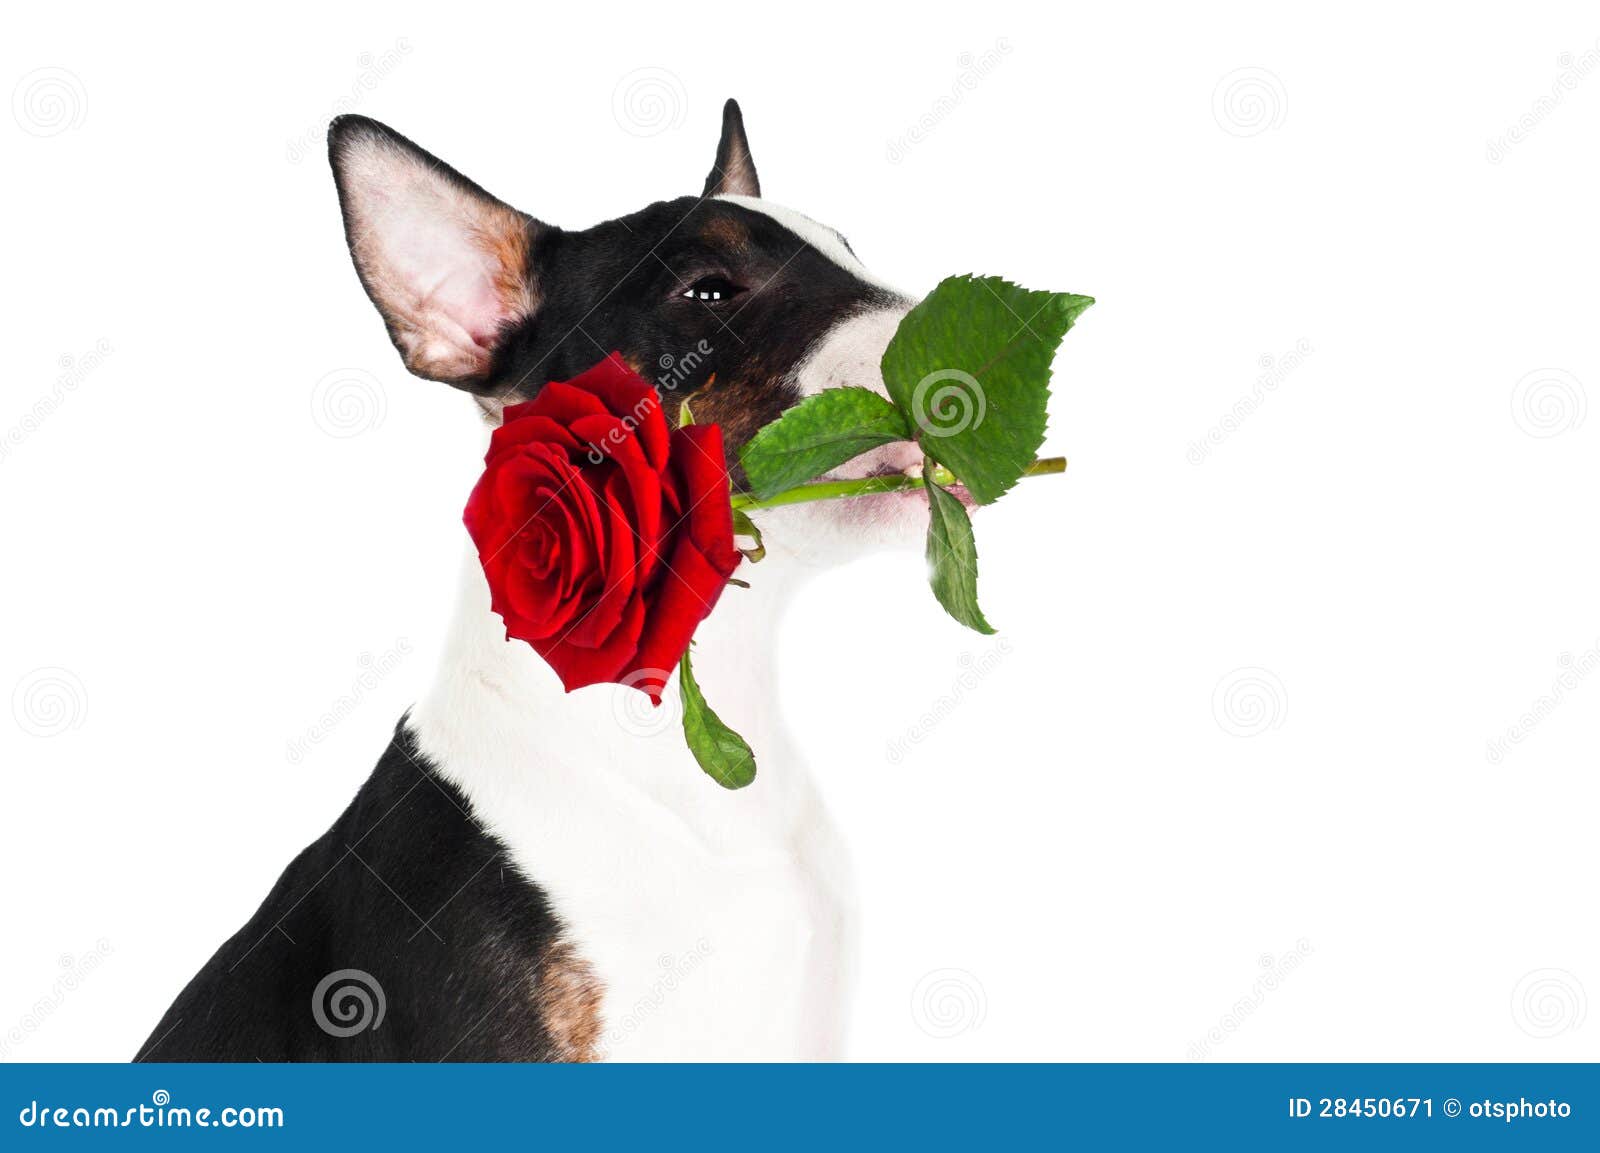 Adorable Puppy Holding a Red Rose Stock Image - Image of beautiful, animal:  28450671